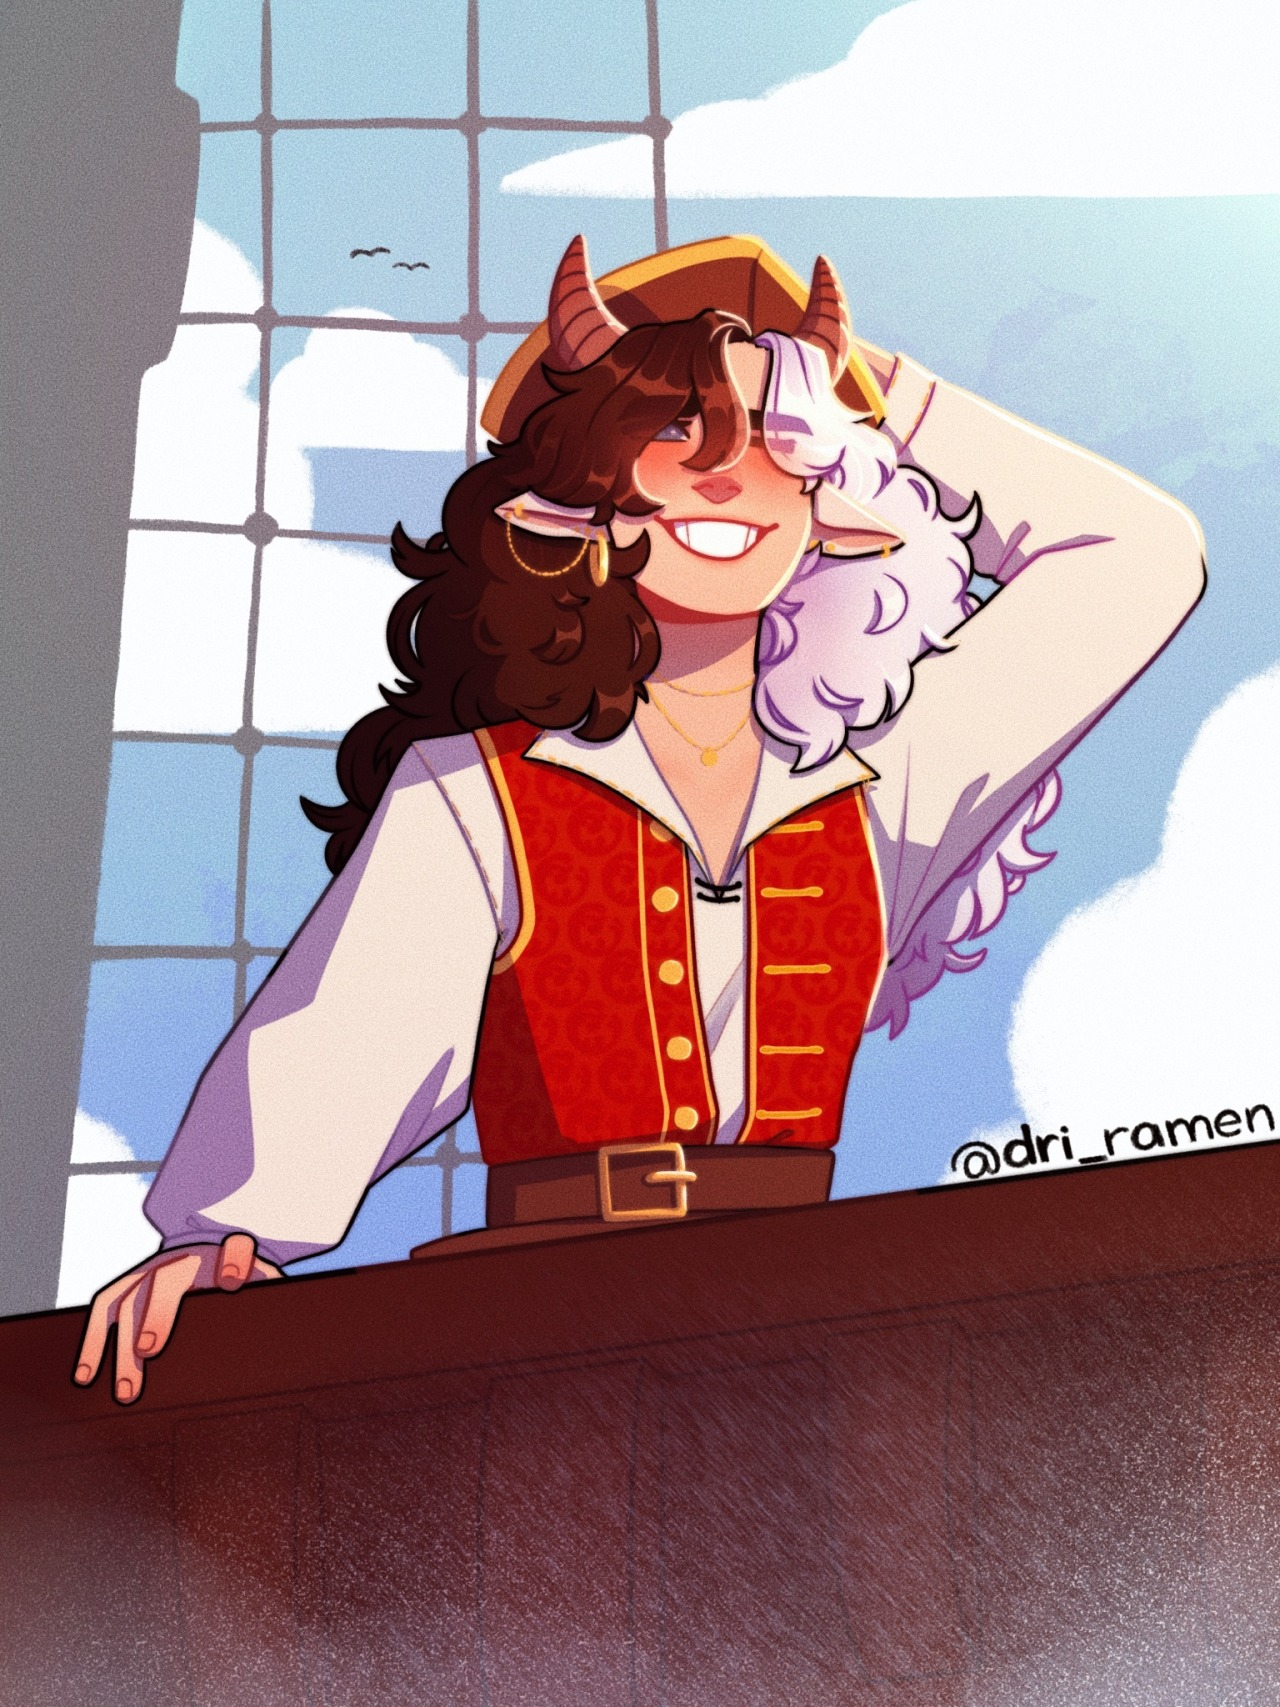 This is a drawing of Puffy in her captain/pirate outfit as a human. She has sheep's horns and ears sticking out of her split brown and white hair. She smiles toothily at the camera while holding onto her hat with one hand. Her right ear is pierced with a gold hoop and there is a small chain in the same ear, spanning the length of it. She is not wearing her coat, showing off her bright red vest and white undershirt. She wears a brown belt with a golden buckle across the vest. She stands on a ship at the railing. There are birds and roping in the background.